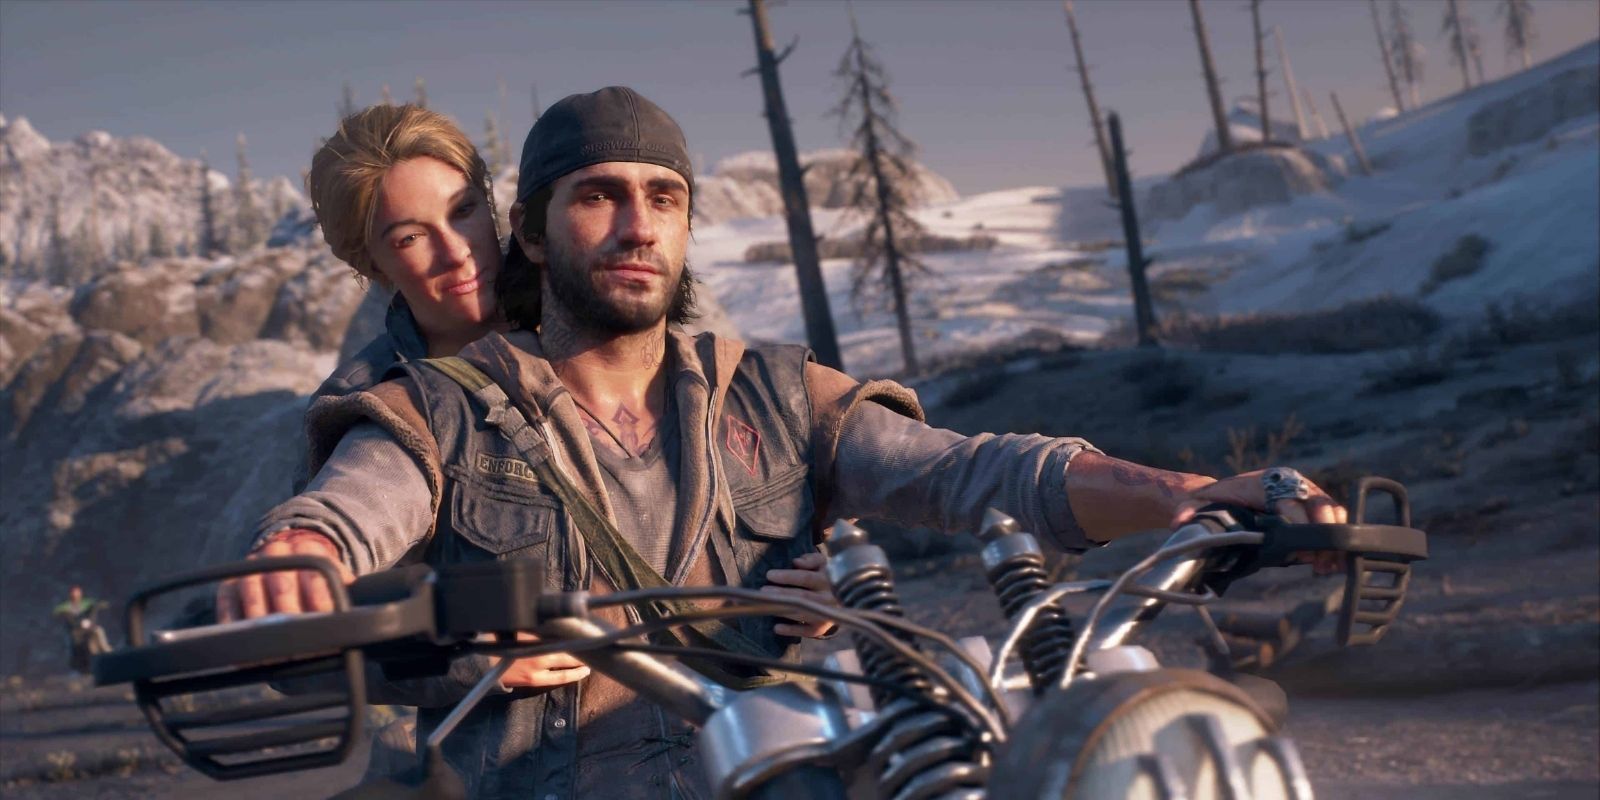 PlayStation Fans Surprised How Much They Like Days Gone After Free Download